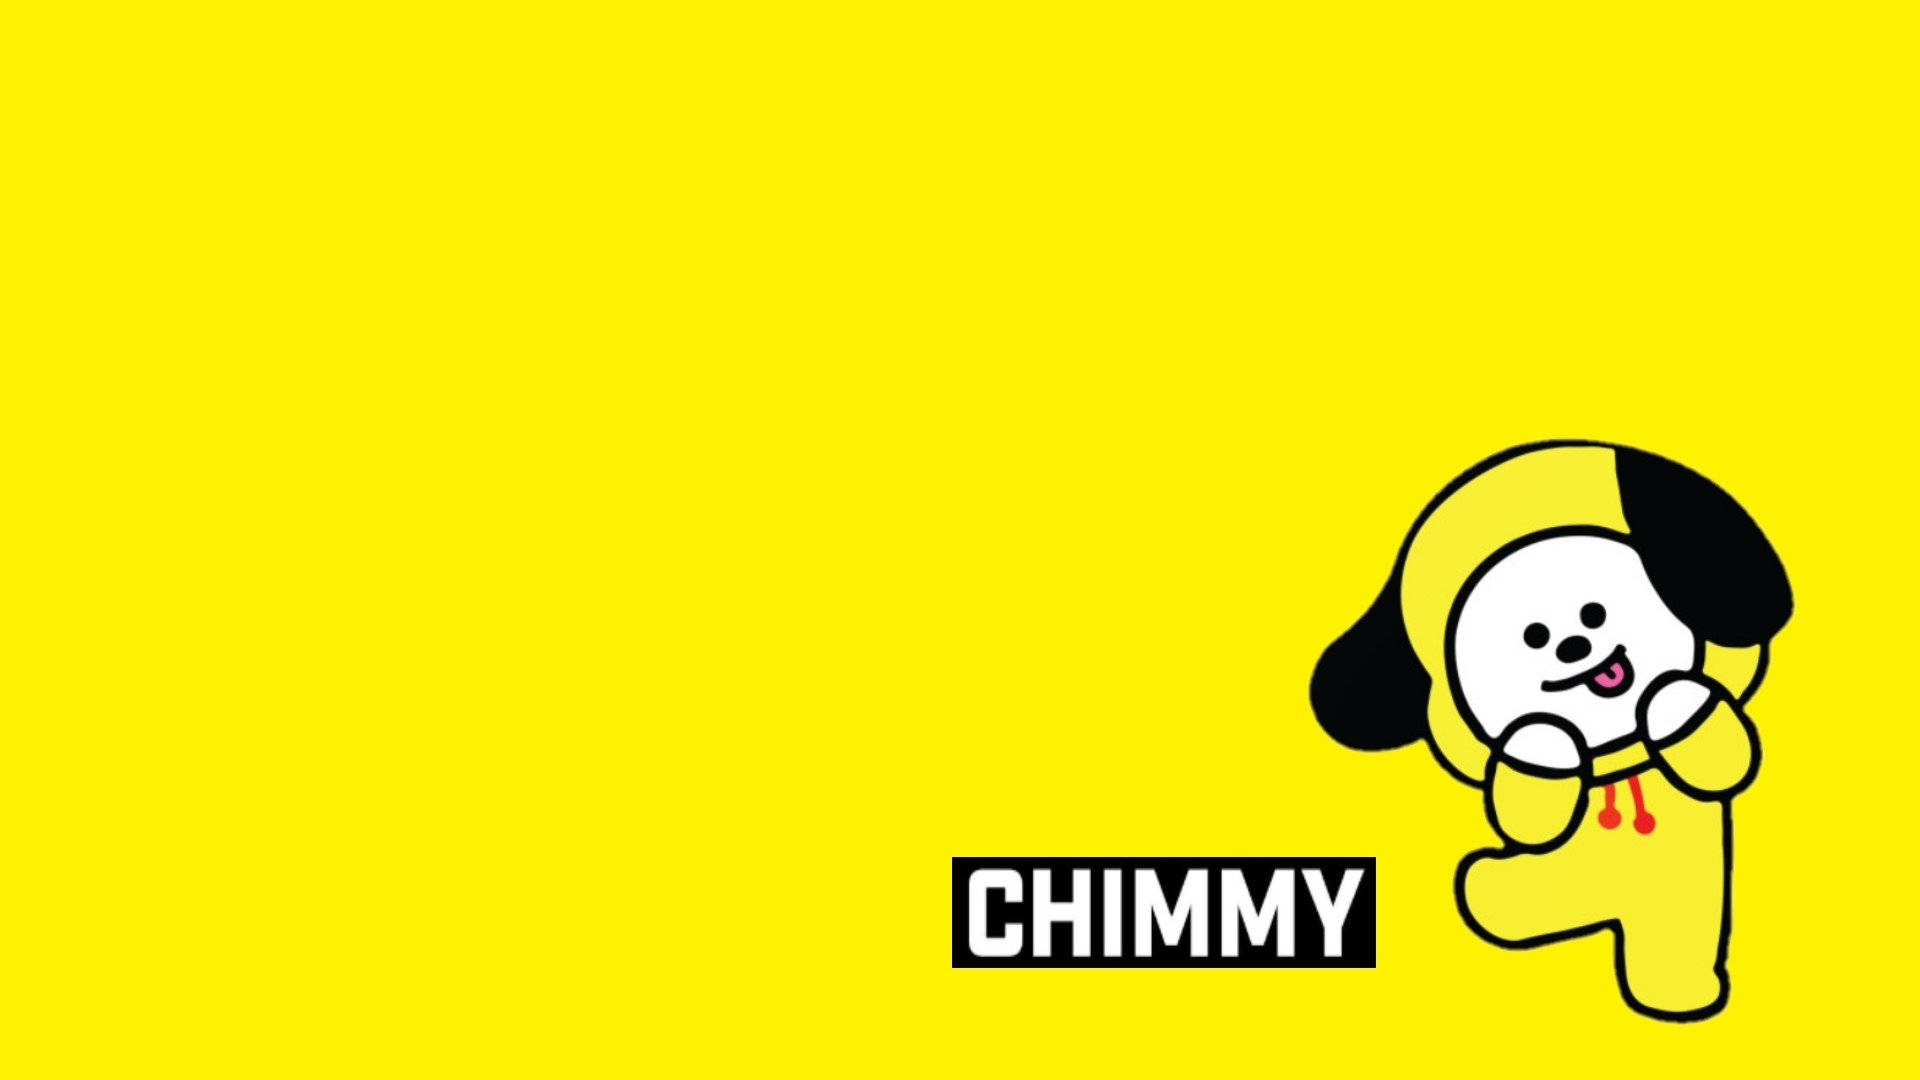 Chimmy Bt21 Character In Yellow Wallpaper